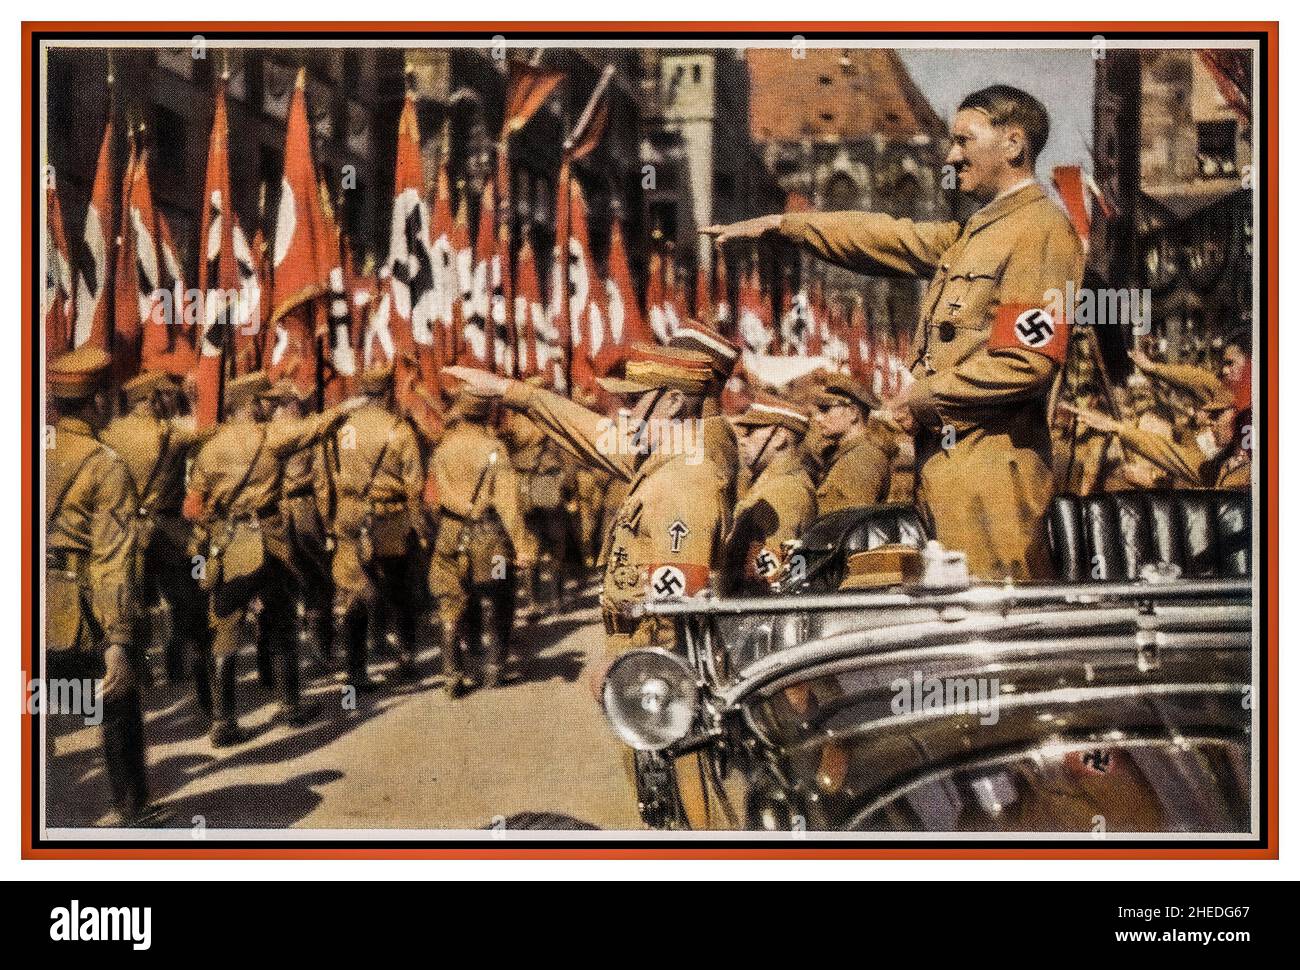 Sturmabteilung Adolf Hitler saluting SA Troops Vintage Nazi Germany c1935. Nuremberg Rally, color photo card of Adolf Hitler wearing a swastika armband in open top Mercedes and SA troops marching past with swastika flags, Verlag H. Wiedemann ,Sturmabteilung The official uniform of the SA was the brown shirt with a brown tie  'The Brown Shirts'. Stock Photo